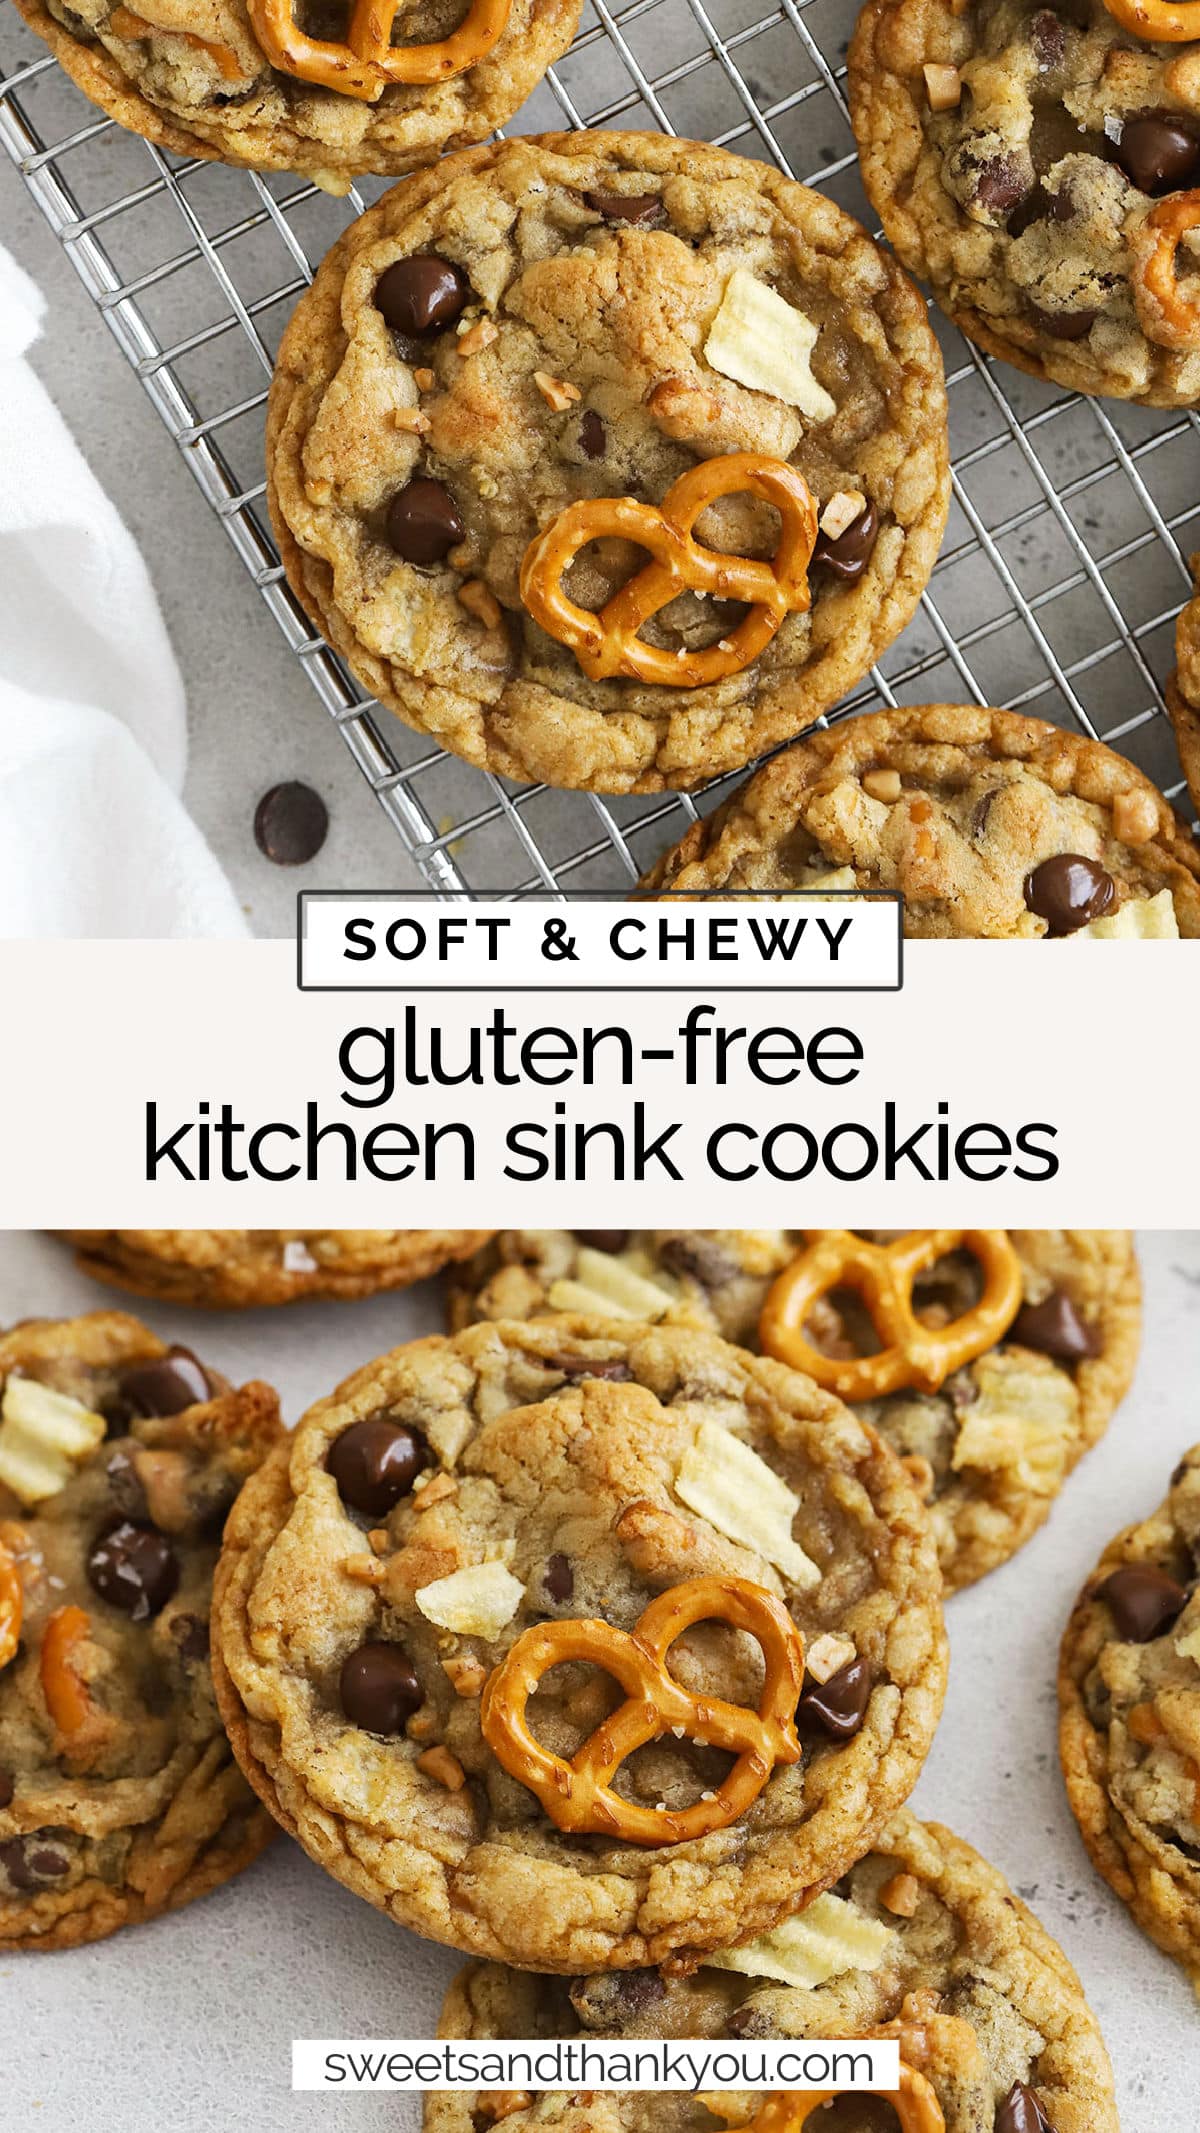 These Gluten-Free Kitchen Sink Cookies let you mix & match your way to your dream cookie. They basically have everything but the kitchen sink! / everything but the kitchen sink cookies gluten free / gluten free kitchen sink cookie recipe / gluten-free cookies / gluten-free chocolate chip cookies / gluten-free cookies with pretzels / gluten-free cookie recipe / gluten free panera cookies / gluten-free panera kitchen sink cookies